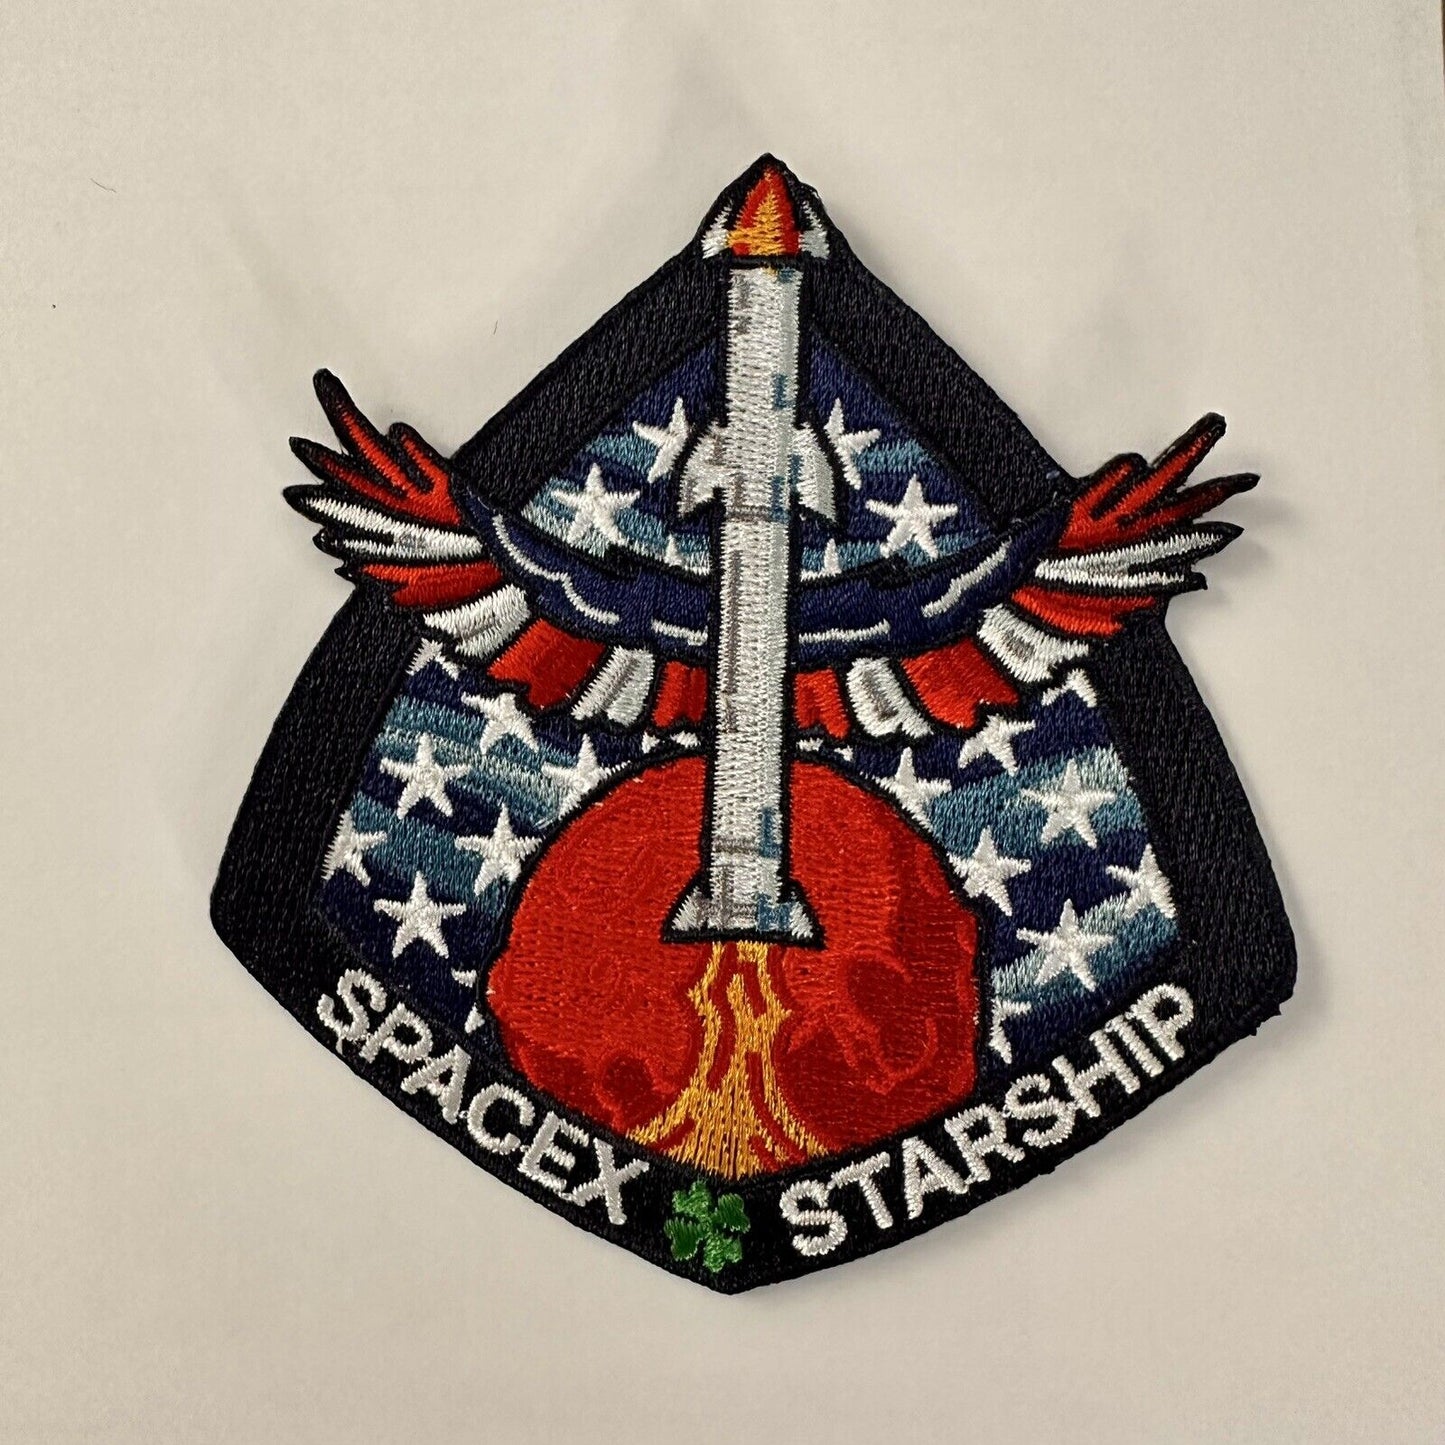 SPACEX STARSHIP PROGRAM MISSION PATCH ORBITAL LAUNCH- 3.5” USA EAGLE